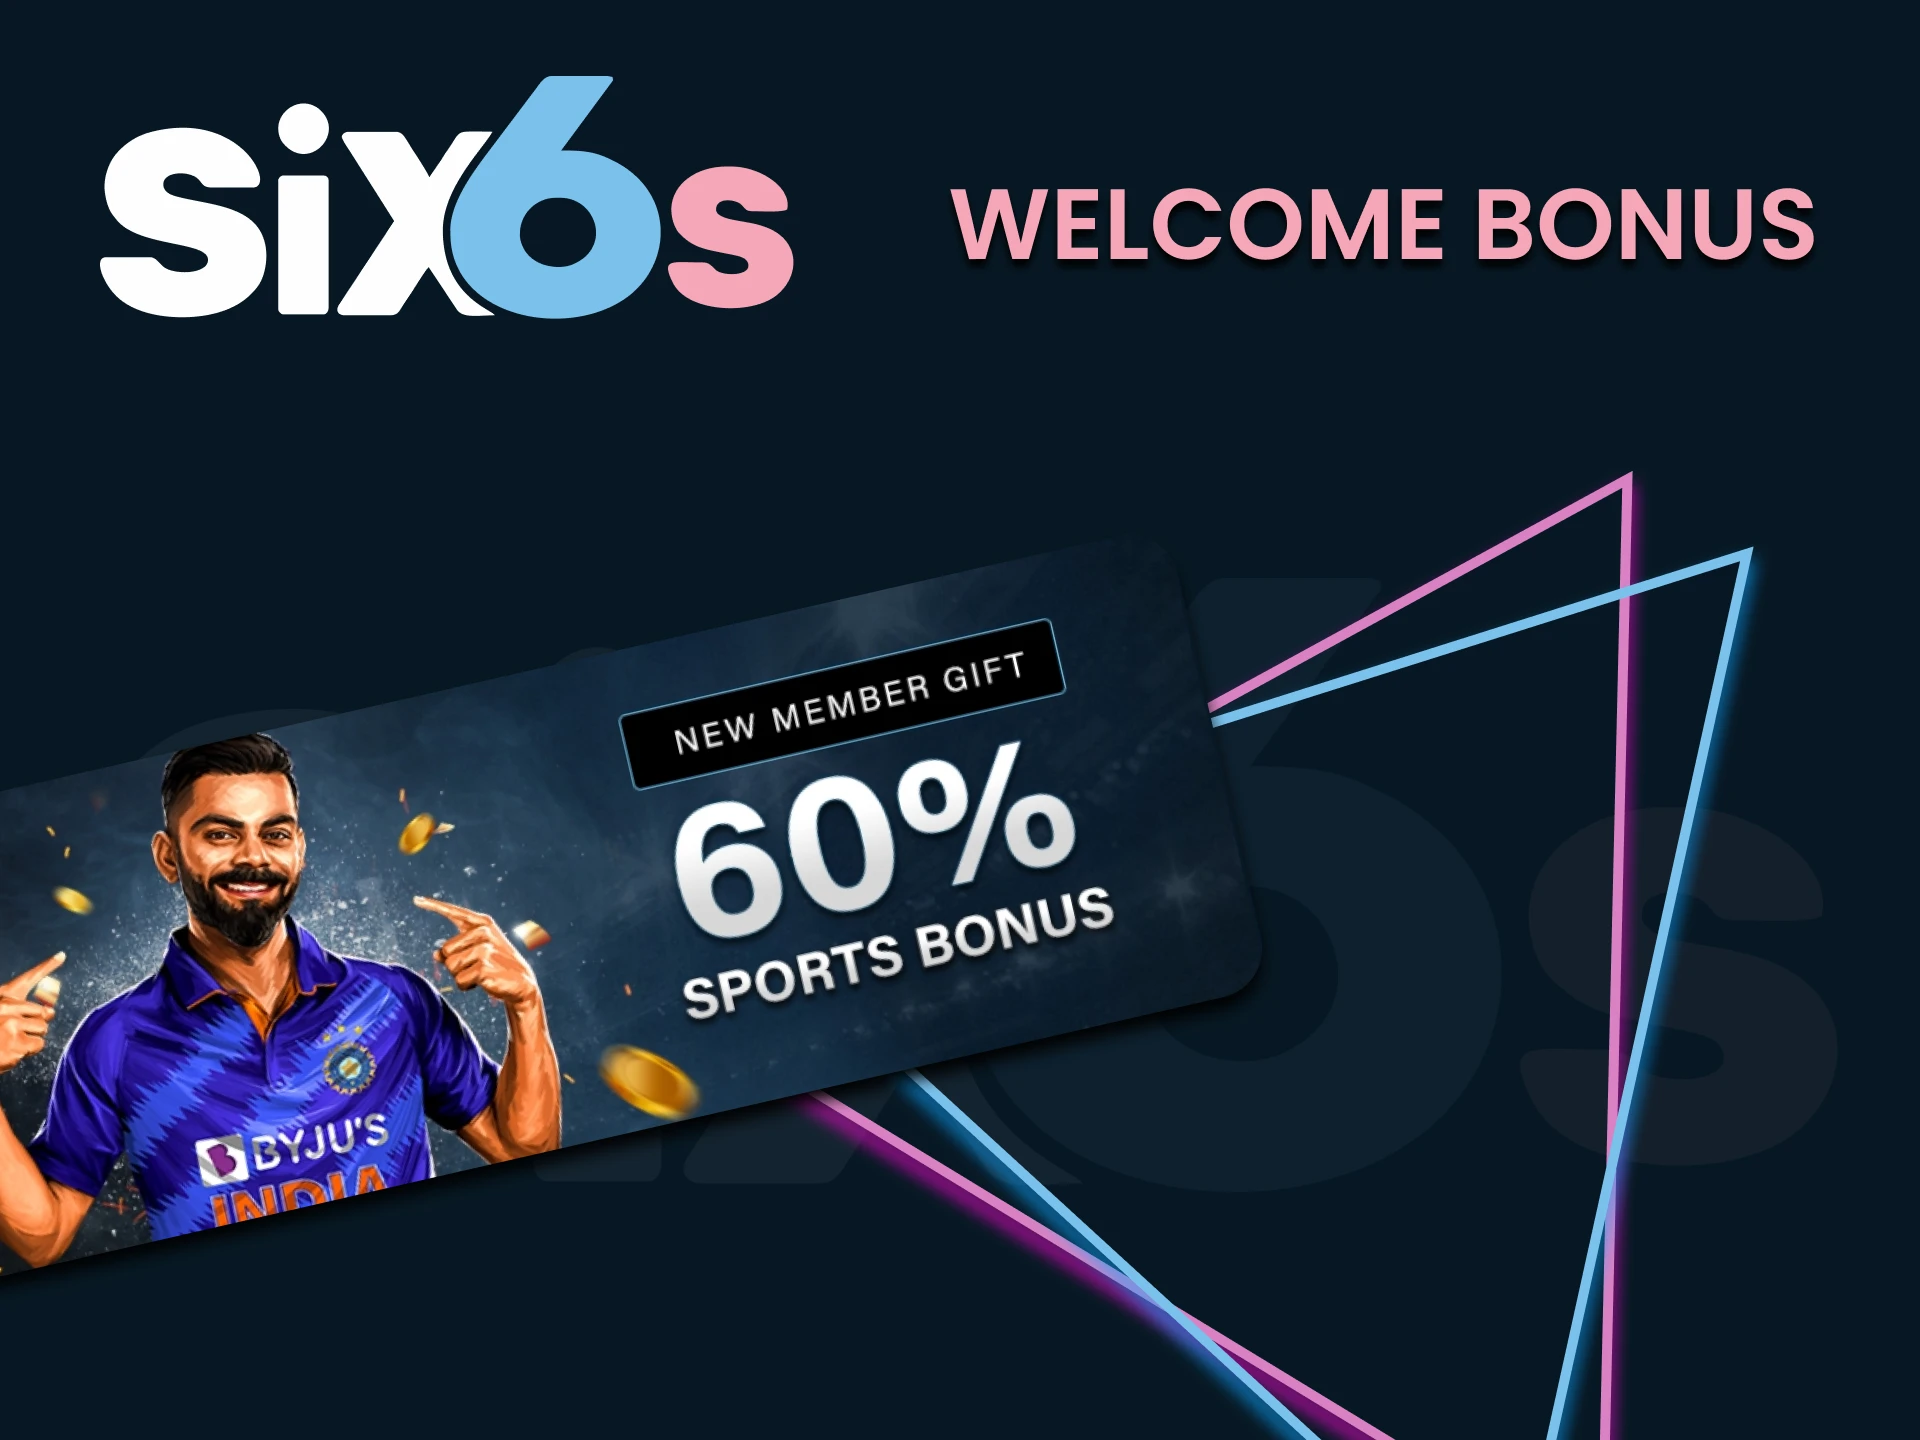 Get your cricket betting bonus from Six6s.